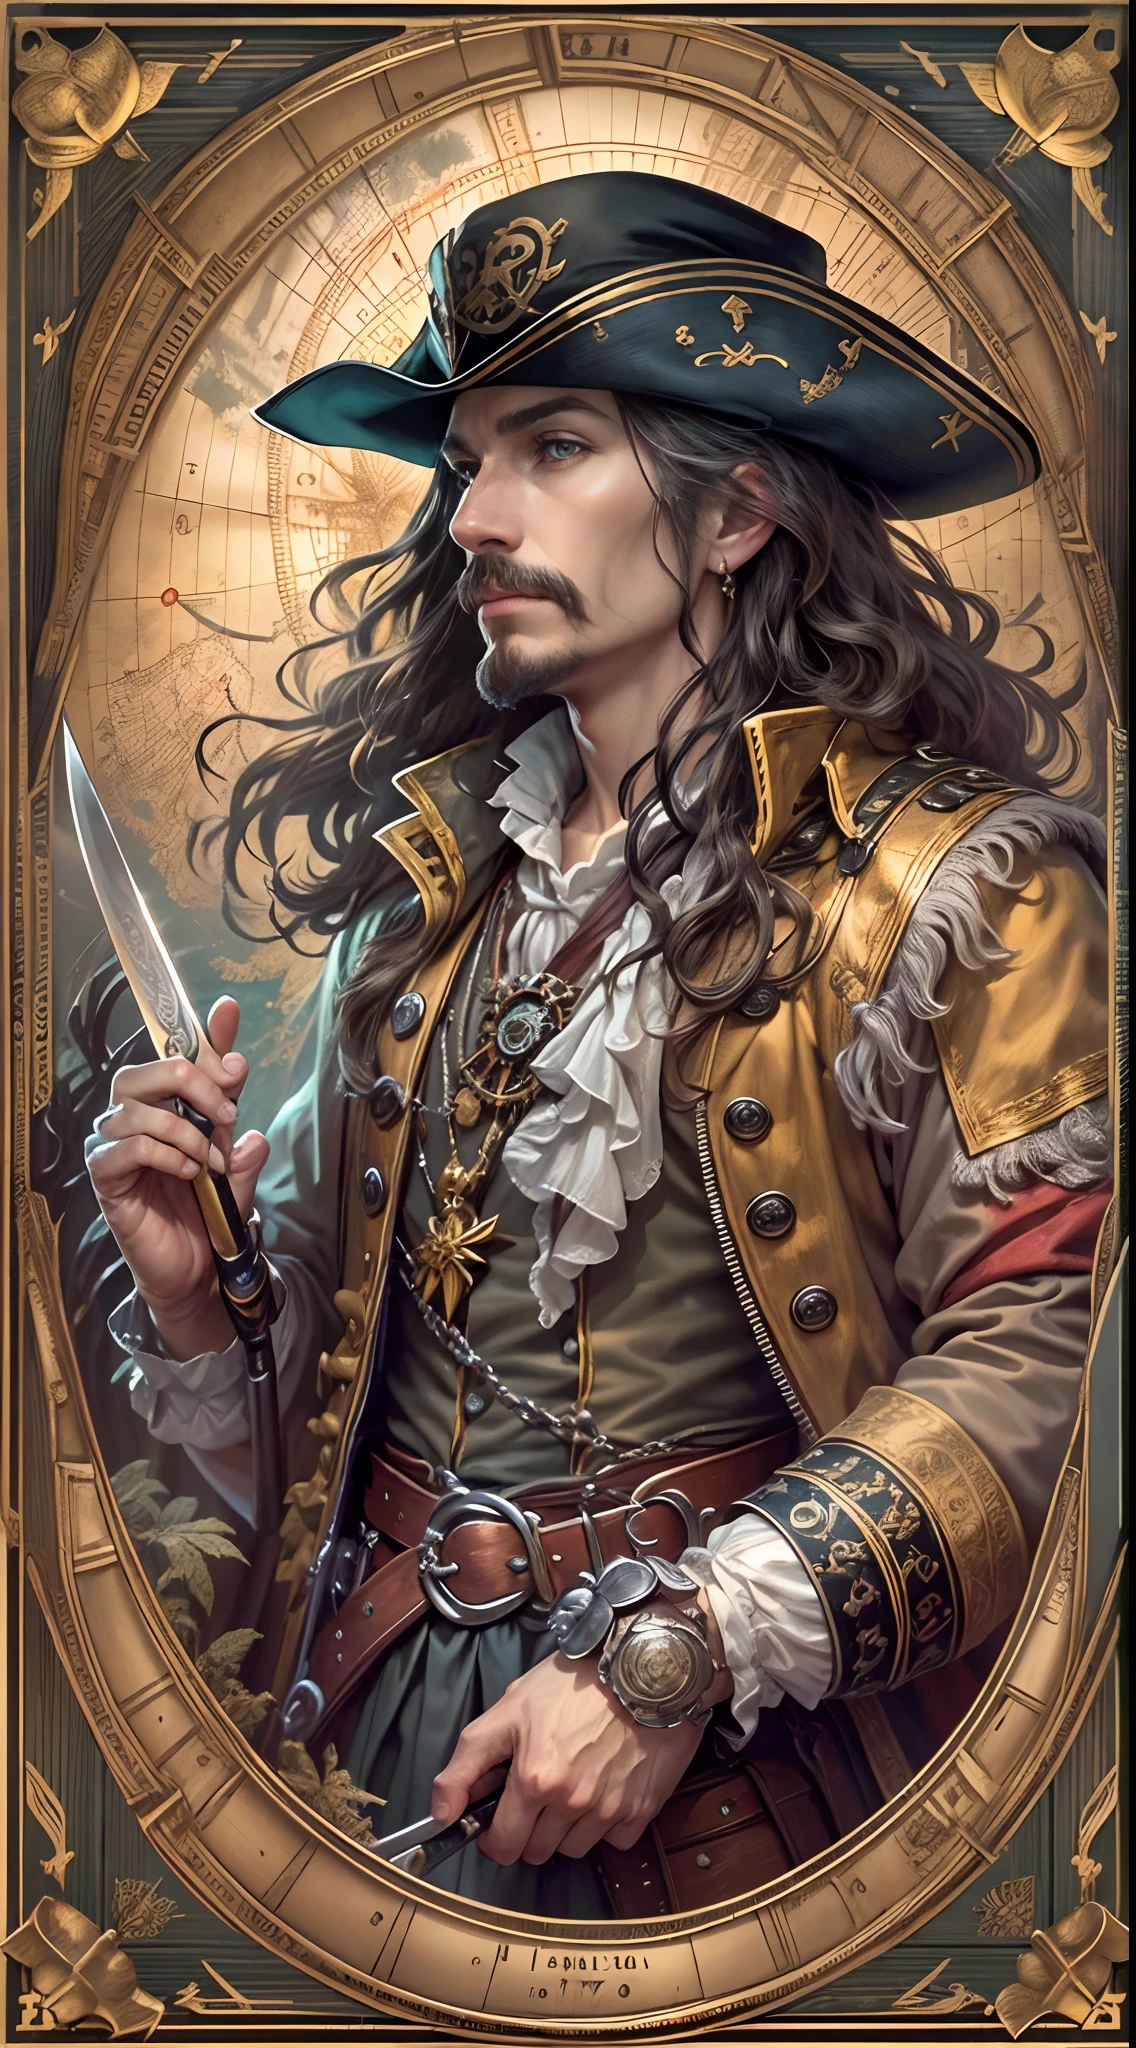 tarot cards，Full tarot border，(The image is surrounded by a tarot card-style border:1.8), 1 man，pirates of the caribbean，JK，Hold the rudder，Handheld compass,（Wearing：black toga，），Black Pearl，Detailed pirate ship，（8K quality），(Hairstyles: with black curled hair，)，Two small mustaches, pirates of the caribbean，8k wallpaper,finely quality eyes，Right eyes，correct hand， Ultra-detailed, Beautiful and aesthetically pleasing, tmasterpiece, best qualityer, (s fractal art: 1.3), dynamic angle, cowboy lens, The most beautiful forms of chaos, elegant, Fauvistdesign, vivd colour, romanticism lain, an art deco，Distant islands, compass，Nautical charts，Monocularuskets，long sword，sabre，Captain cap，Vintage style，Look down from above，（zentangle，datura，Tangles，entangled）， (s fractal art: 1.3)，holy rays，gold foil，Gold leaf art，glitter drawing，Full tarot border，（Full border 1.5）